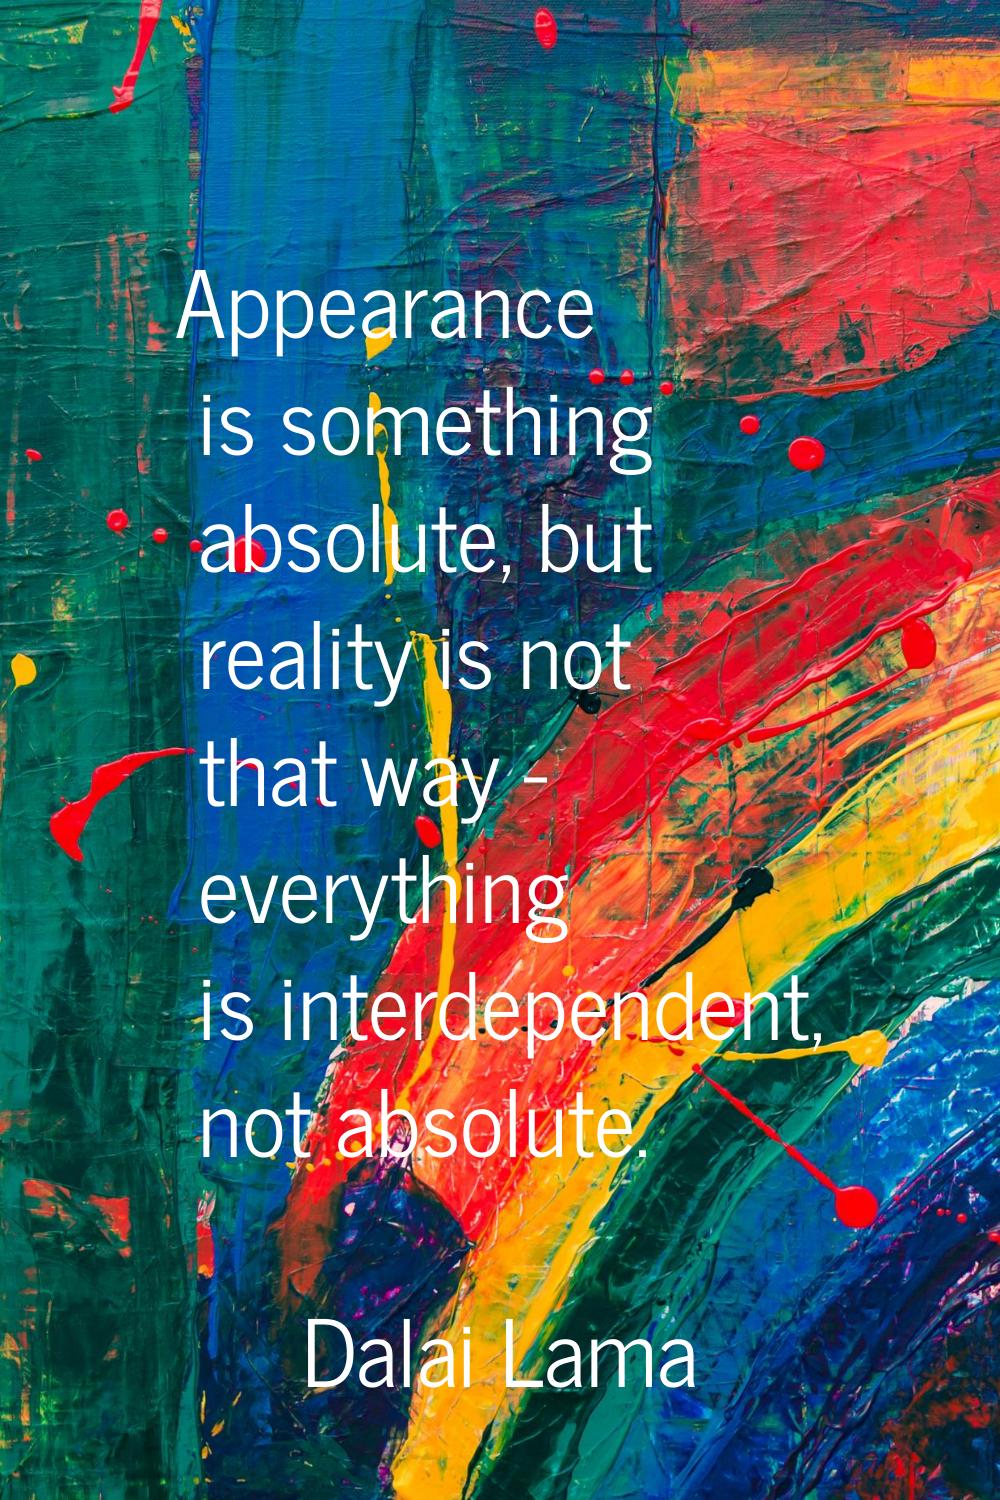 Appearance is something absolute, but reality is not that way - everything is interdependent, not a